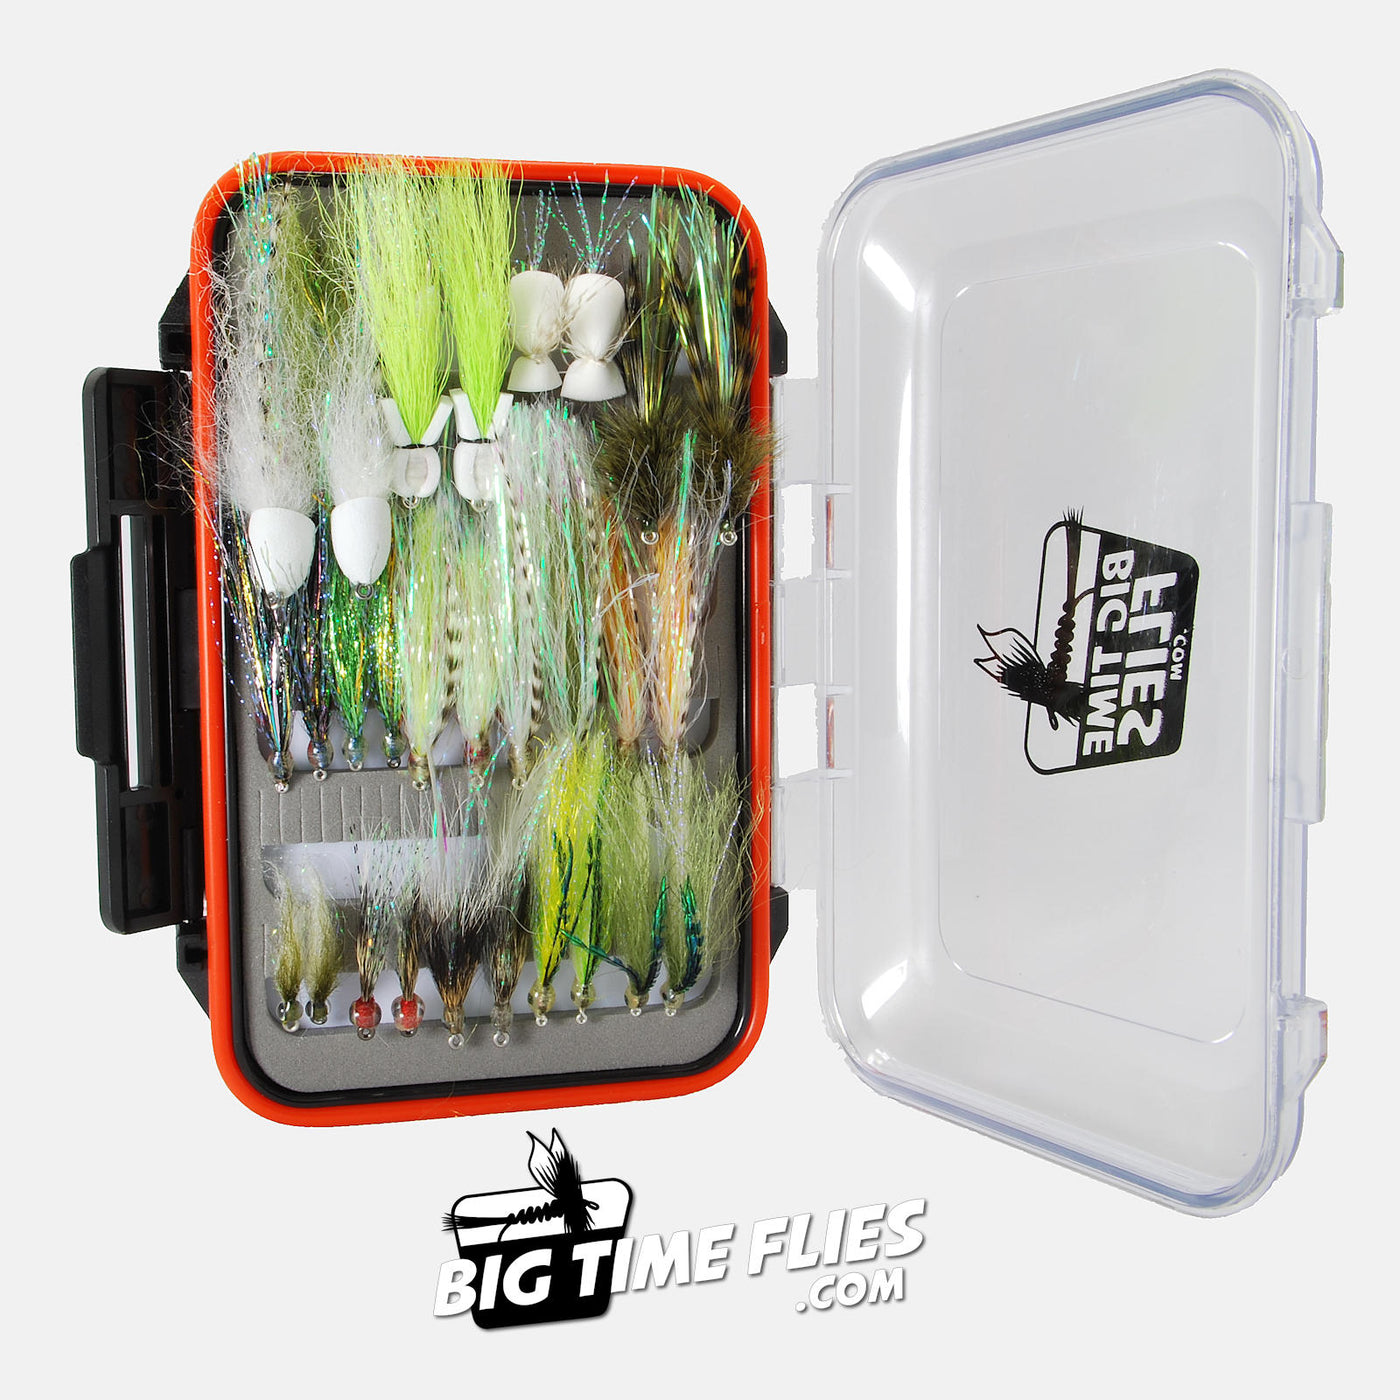 Fly Selection - Puget Sound Beaches – BigTimeFlies